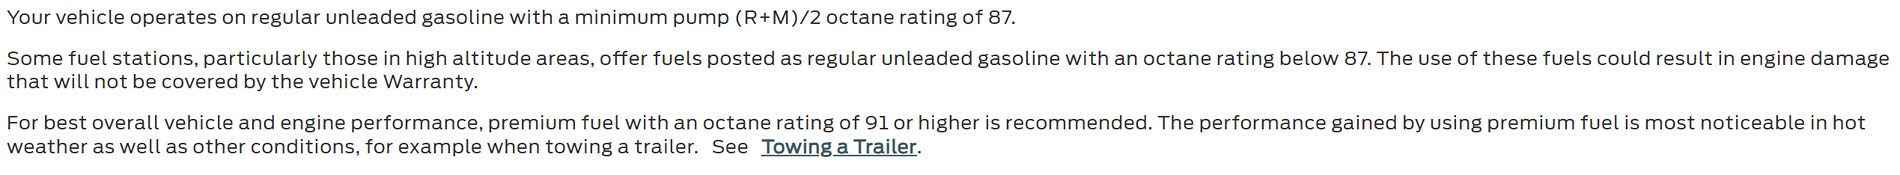 Ford Ranger Is the official 405 posted horsepower on 87 octane? fuel.PNG